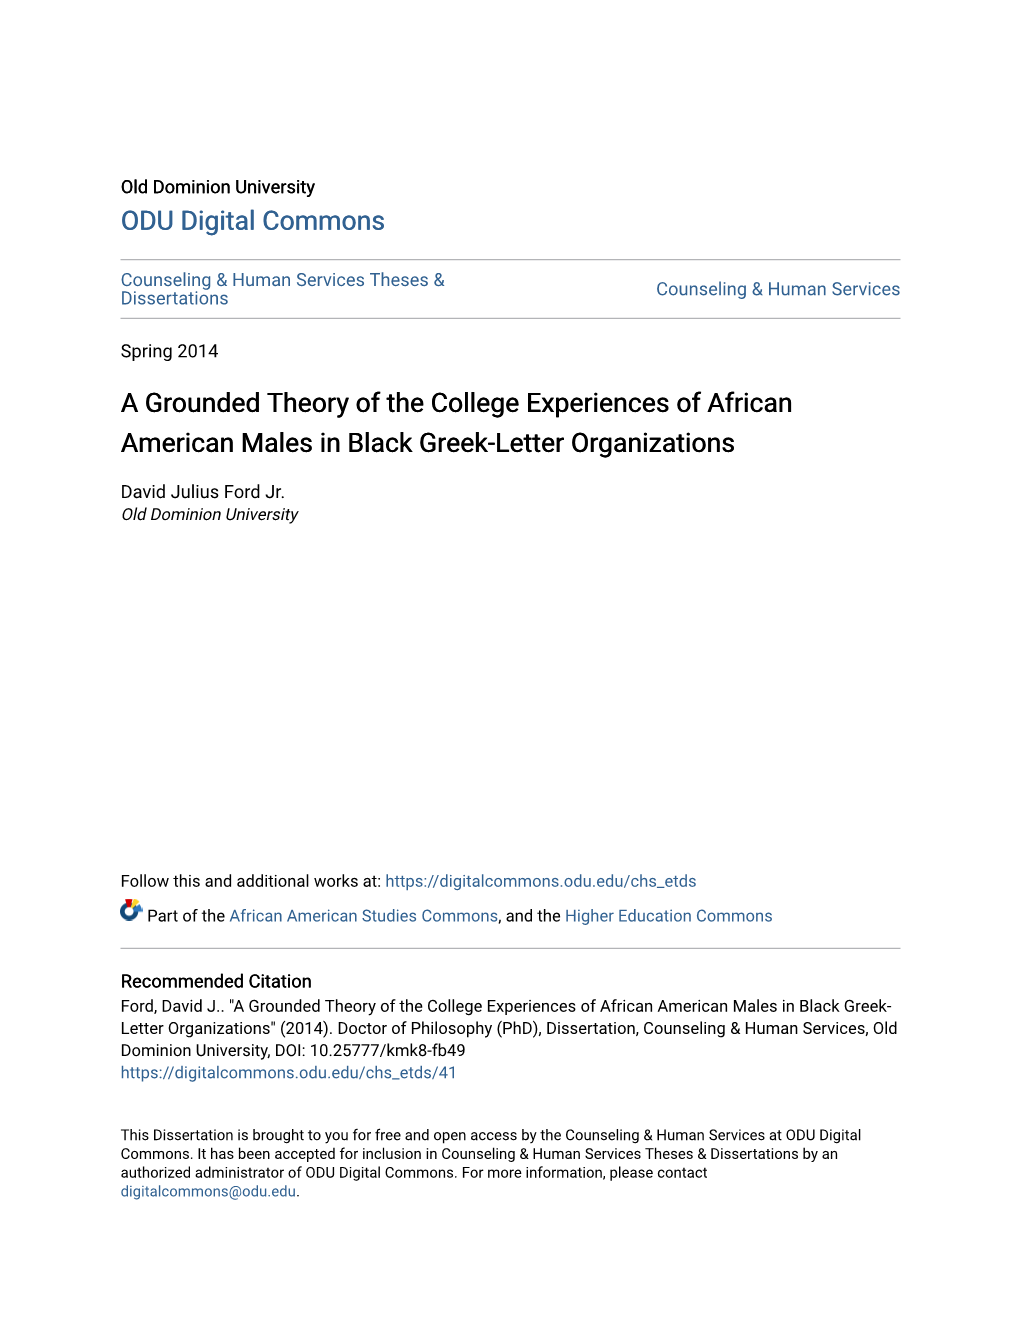 A Grounded Theory of the College Experiences of African American Males in Black Greek-Letter Organizations